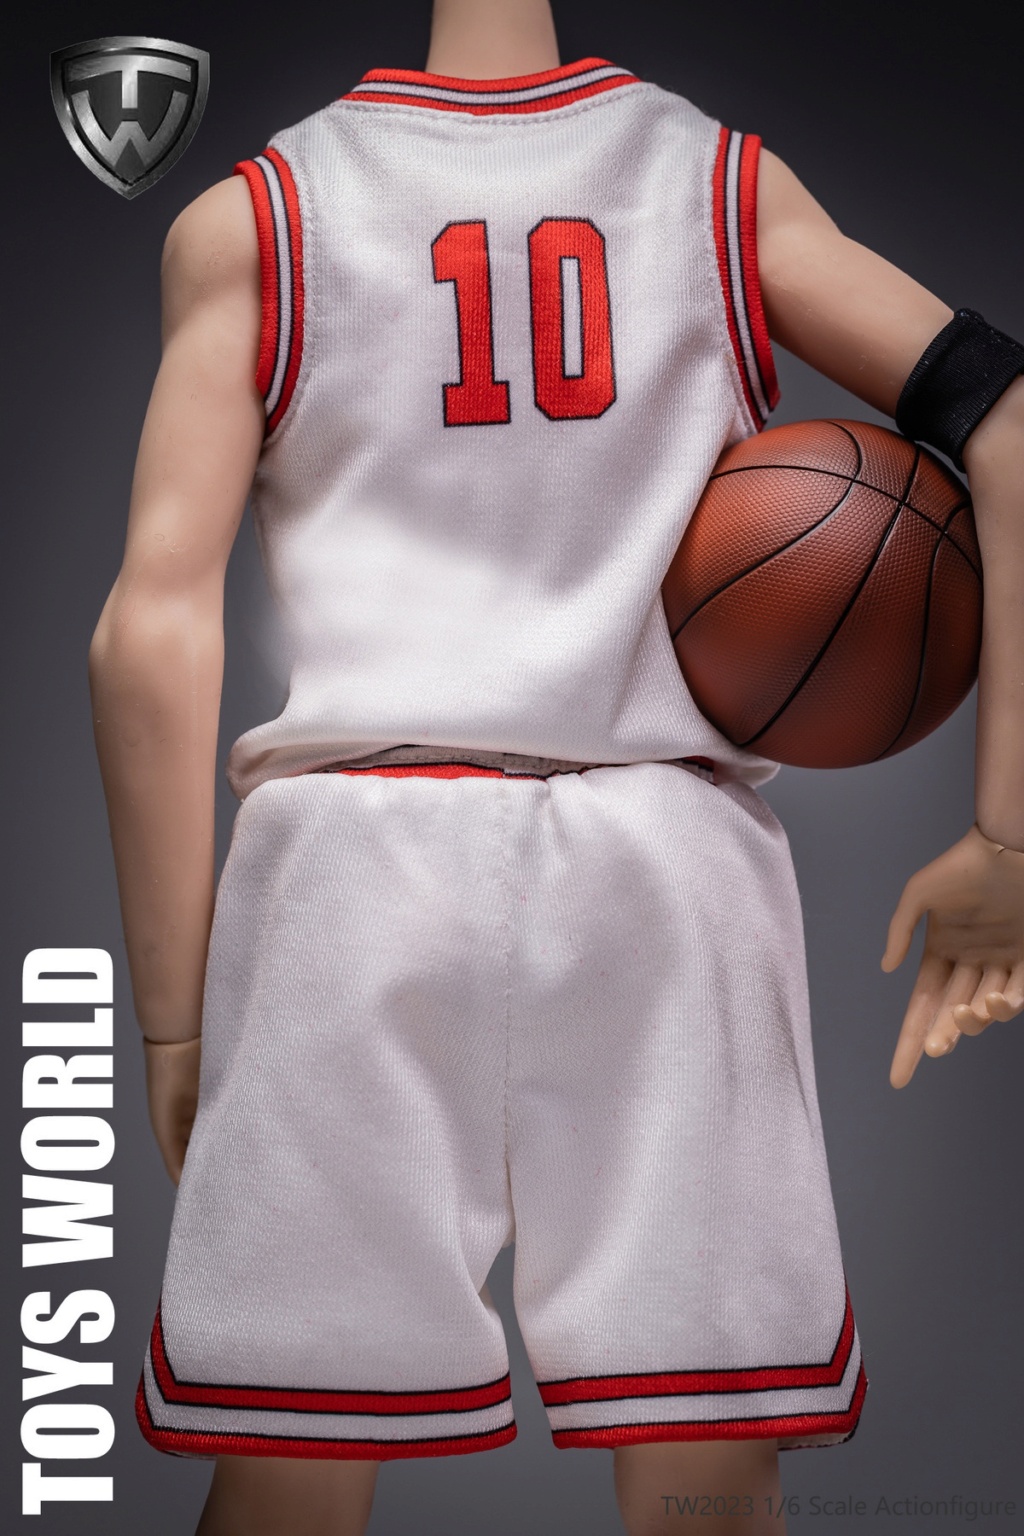 NEW PRODUCT: TOYS WORLD: 1/6 Slam Dunk Ball Suit #TW2023 11255011